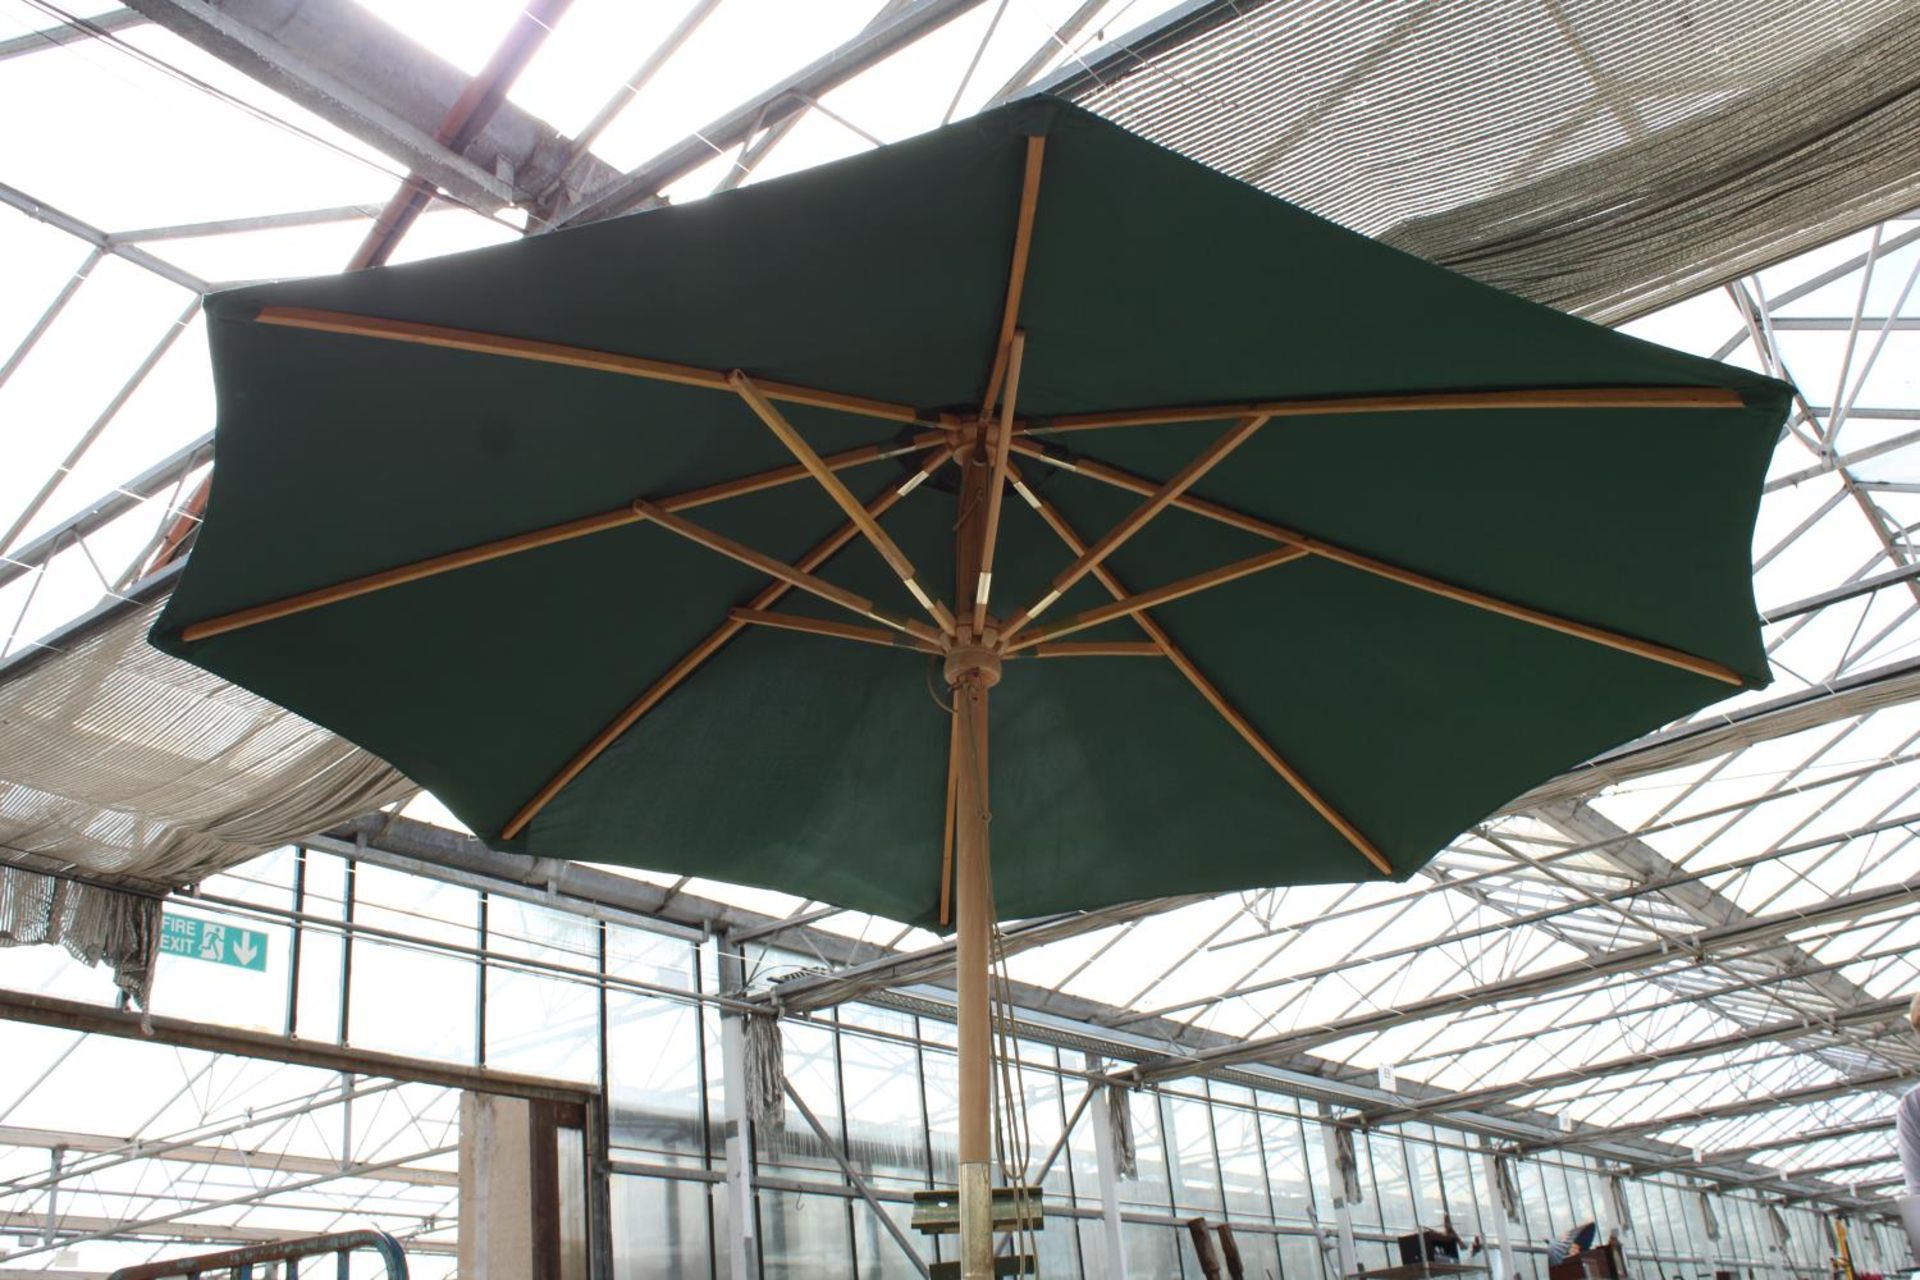 AN OVAL TEAK EXTENDING GARDEN TABLE WITH TWO FOLDING TEAK CHAIRS, A PARASOL AND PARASOL BASE - Image 4 of 5